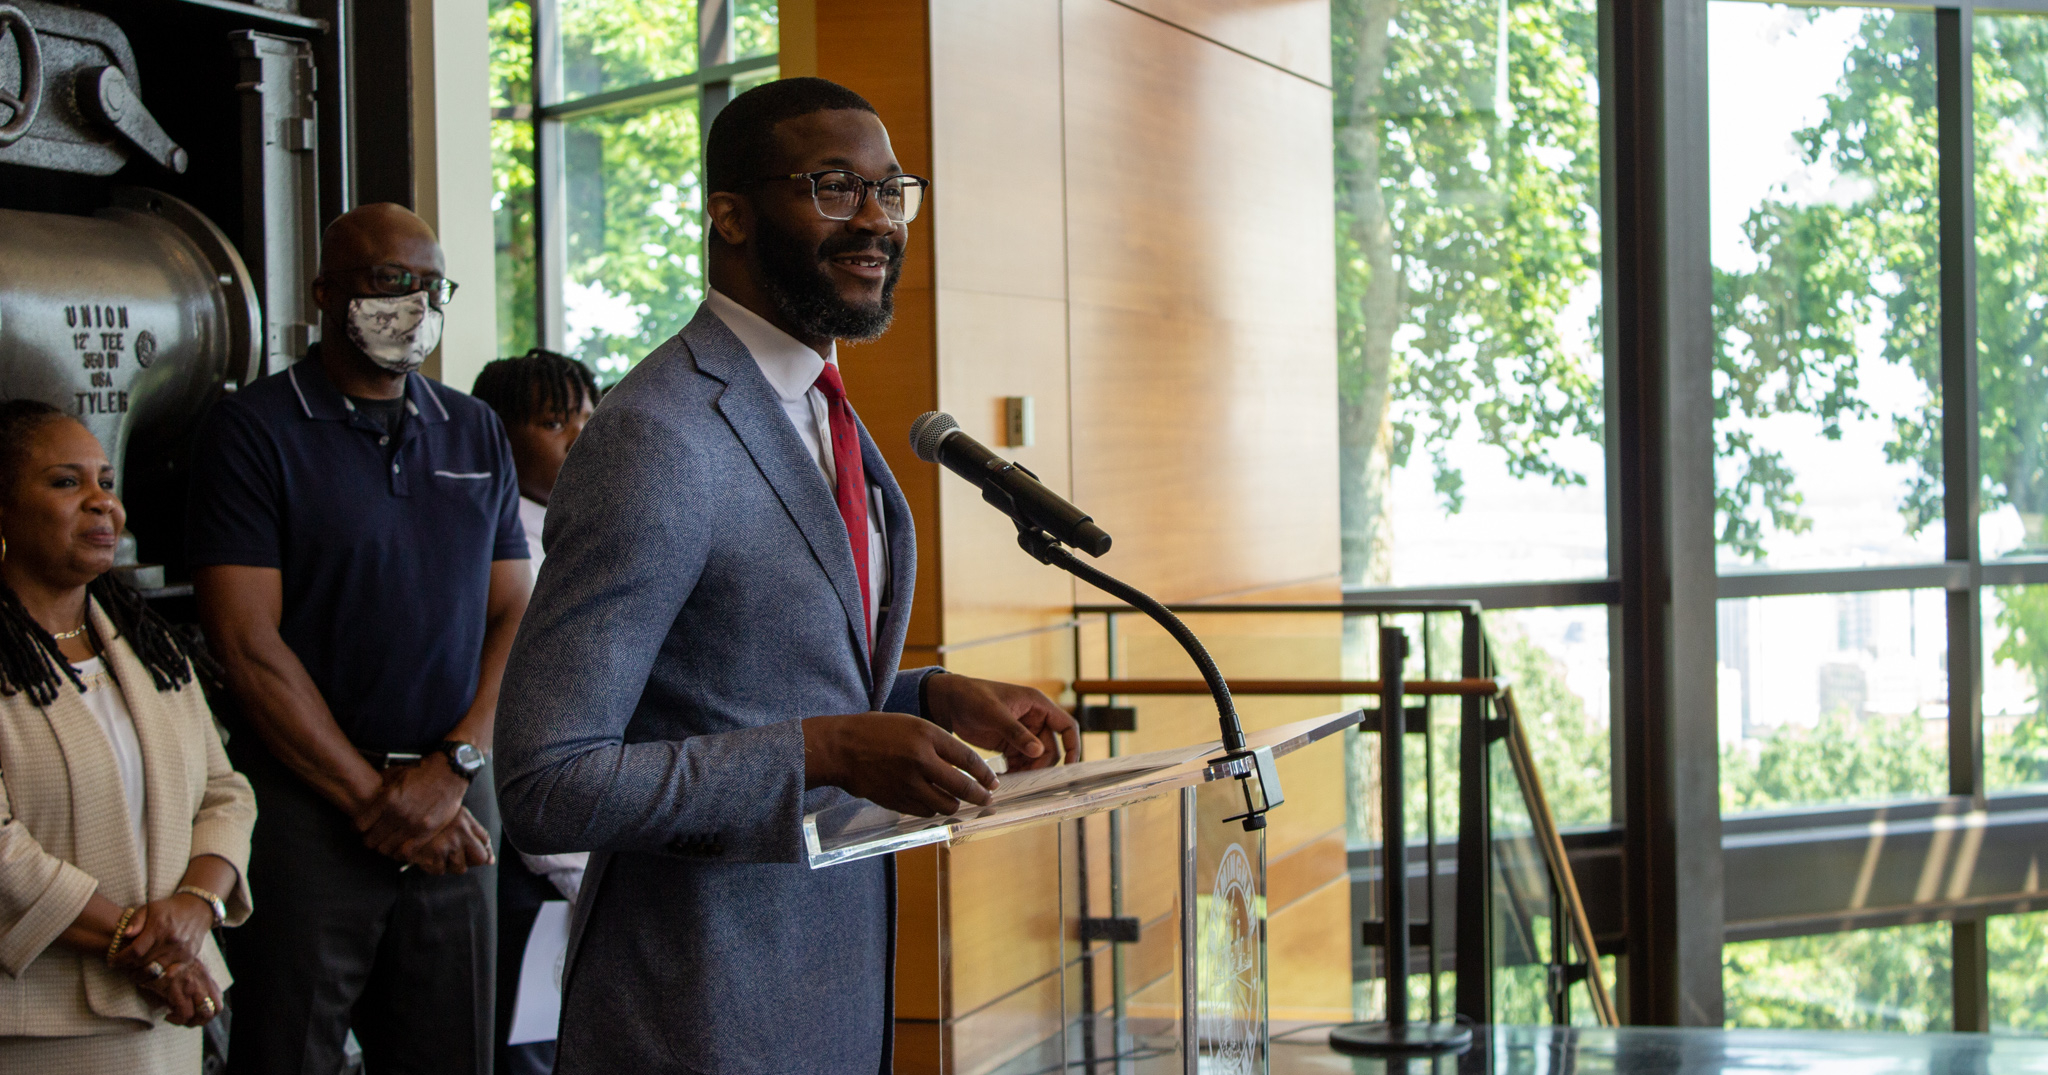 Mayor Woodfin is excited to celebrate Birmingham's 150th birthday all year! Photo by Libby Foster for Bham Now.